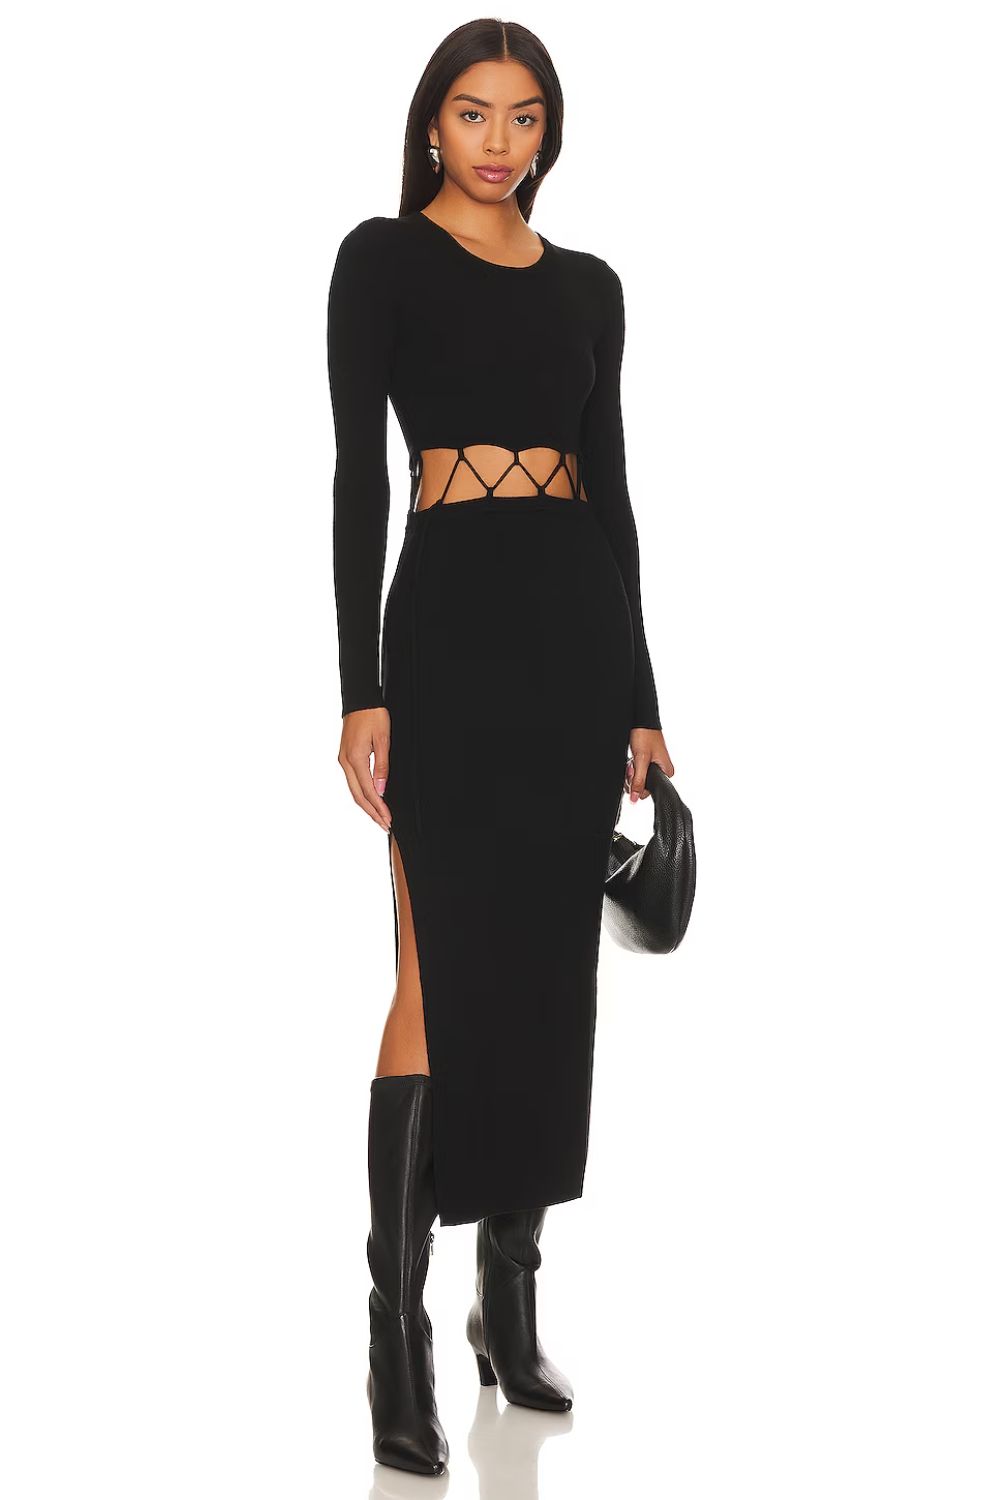 Knit Laced Crew Dress with Cut Outs + Mid Calf Boots